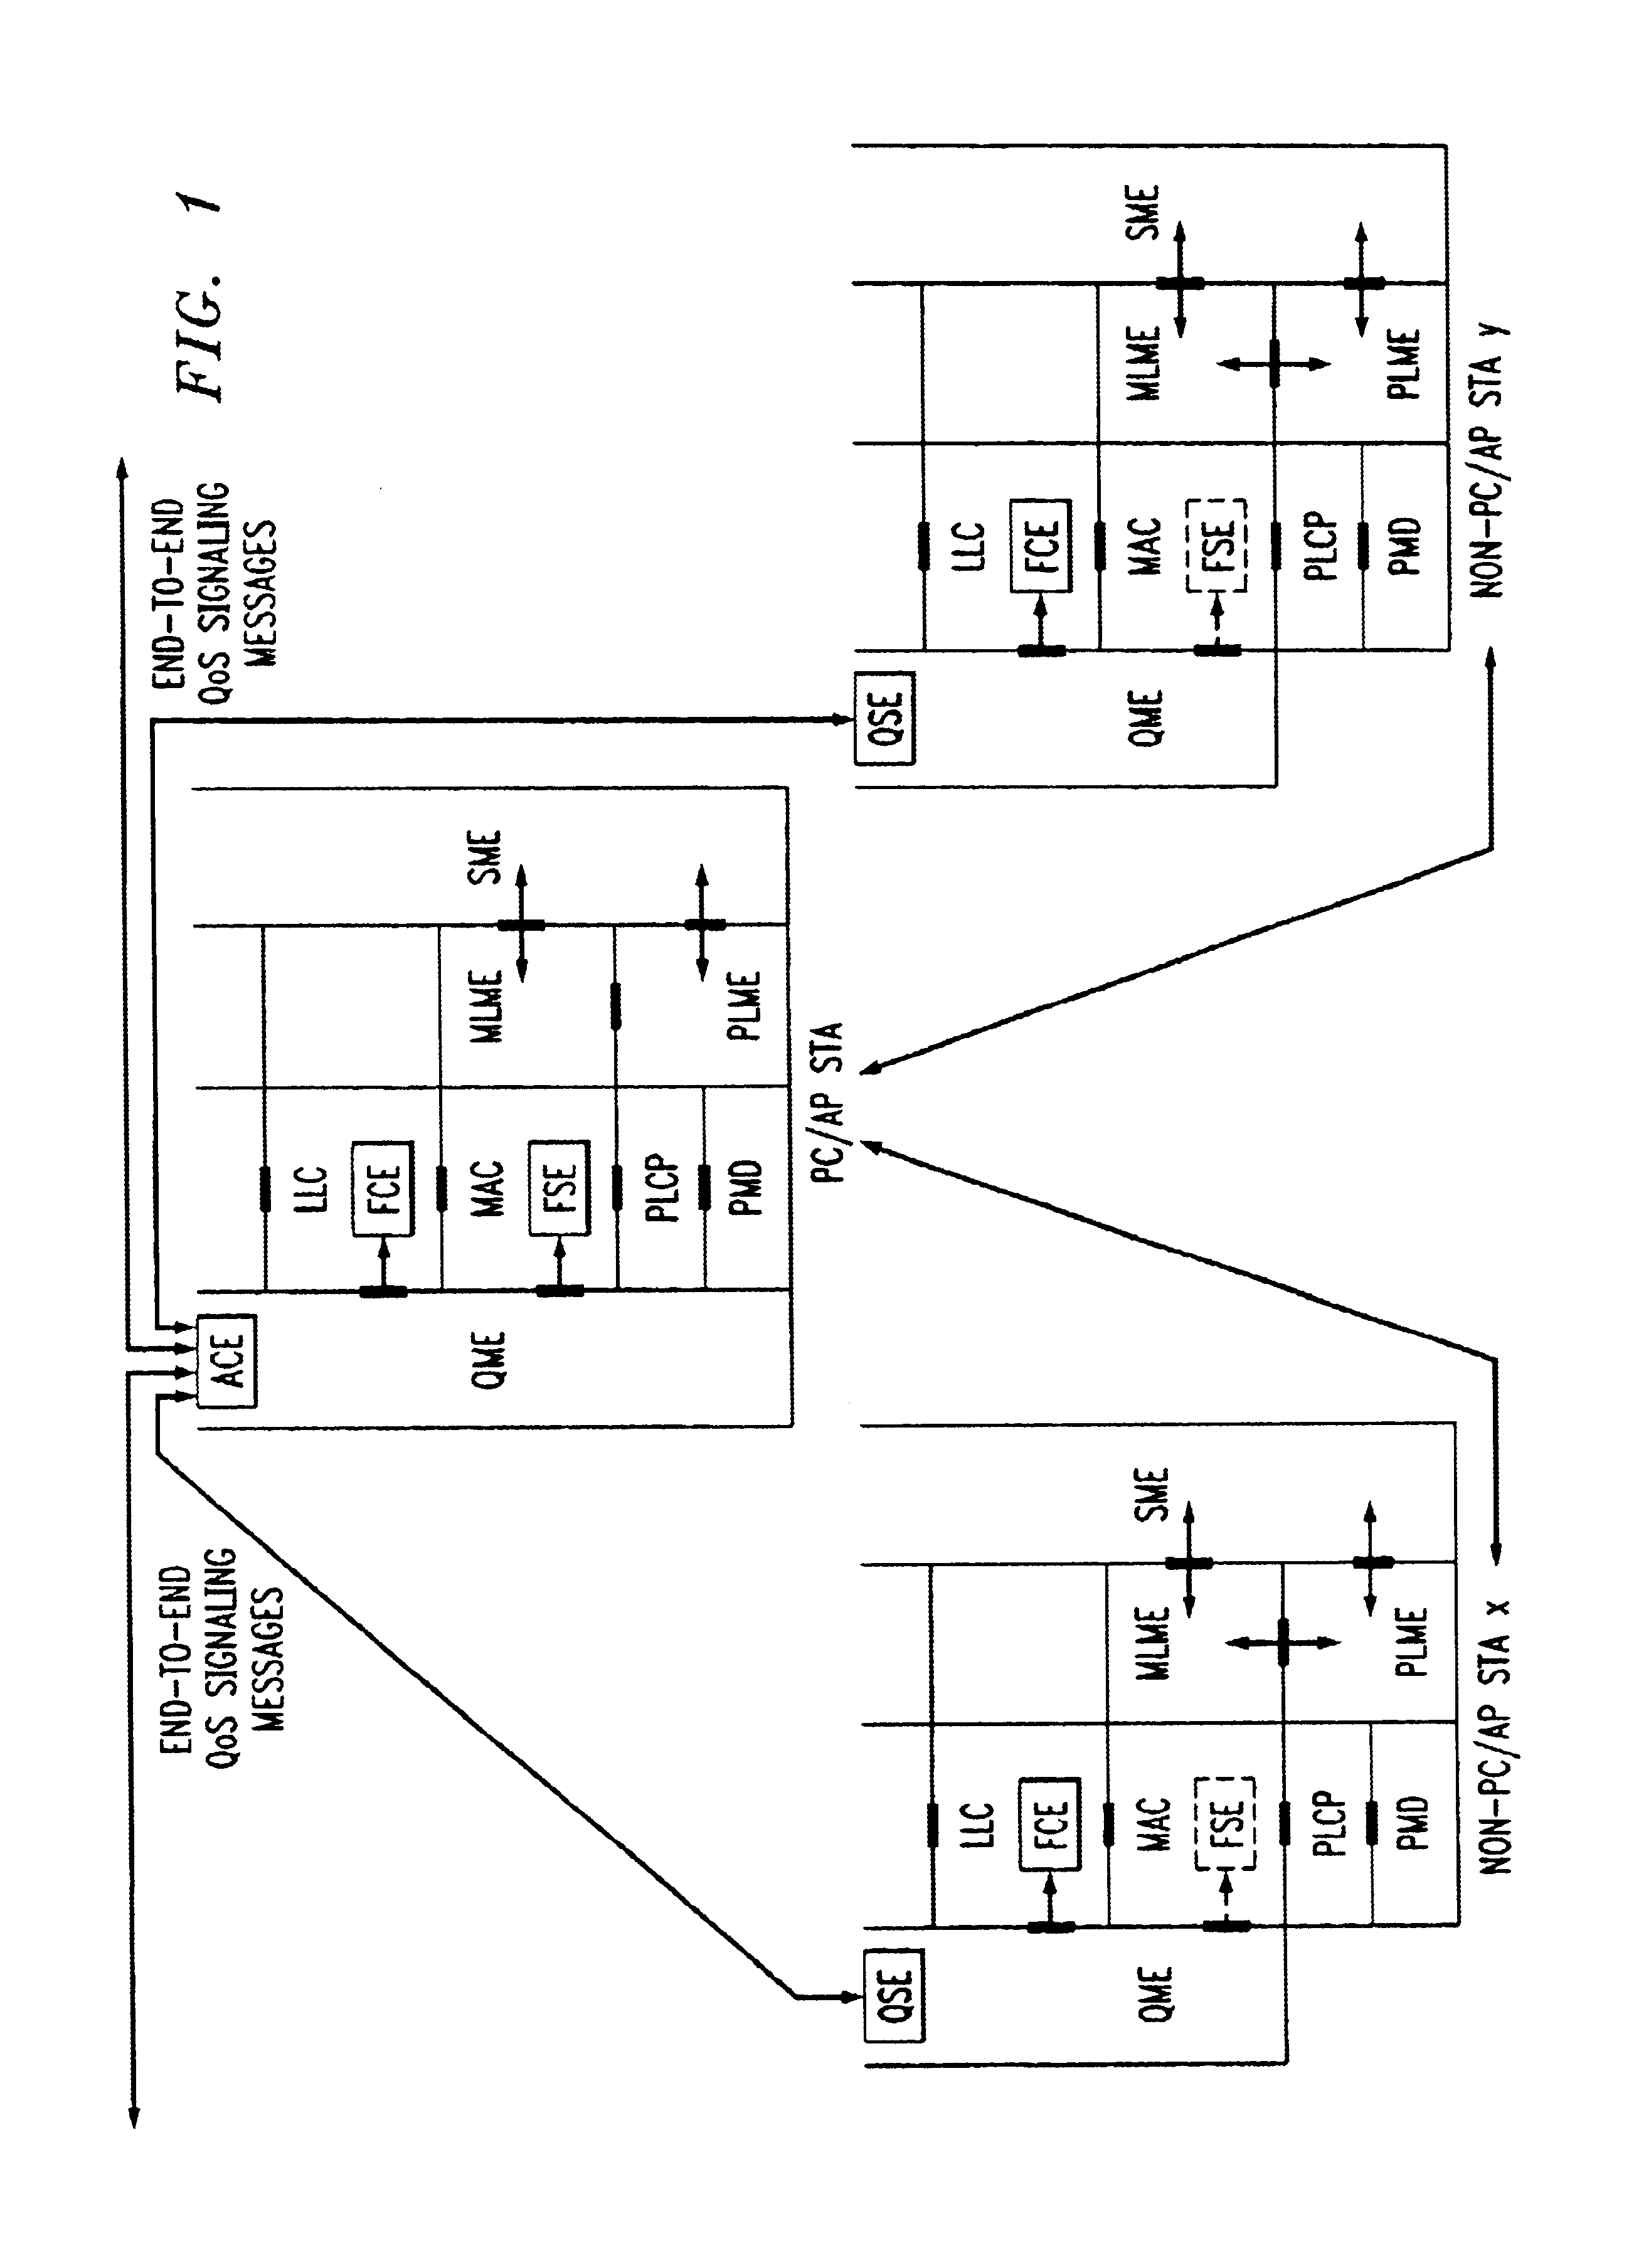 System and method of frame scheduling for QoS-driven wireless local area network (WLAN)